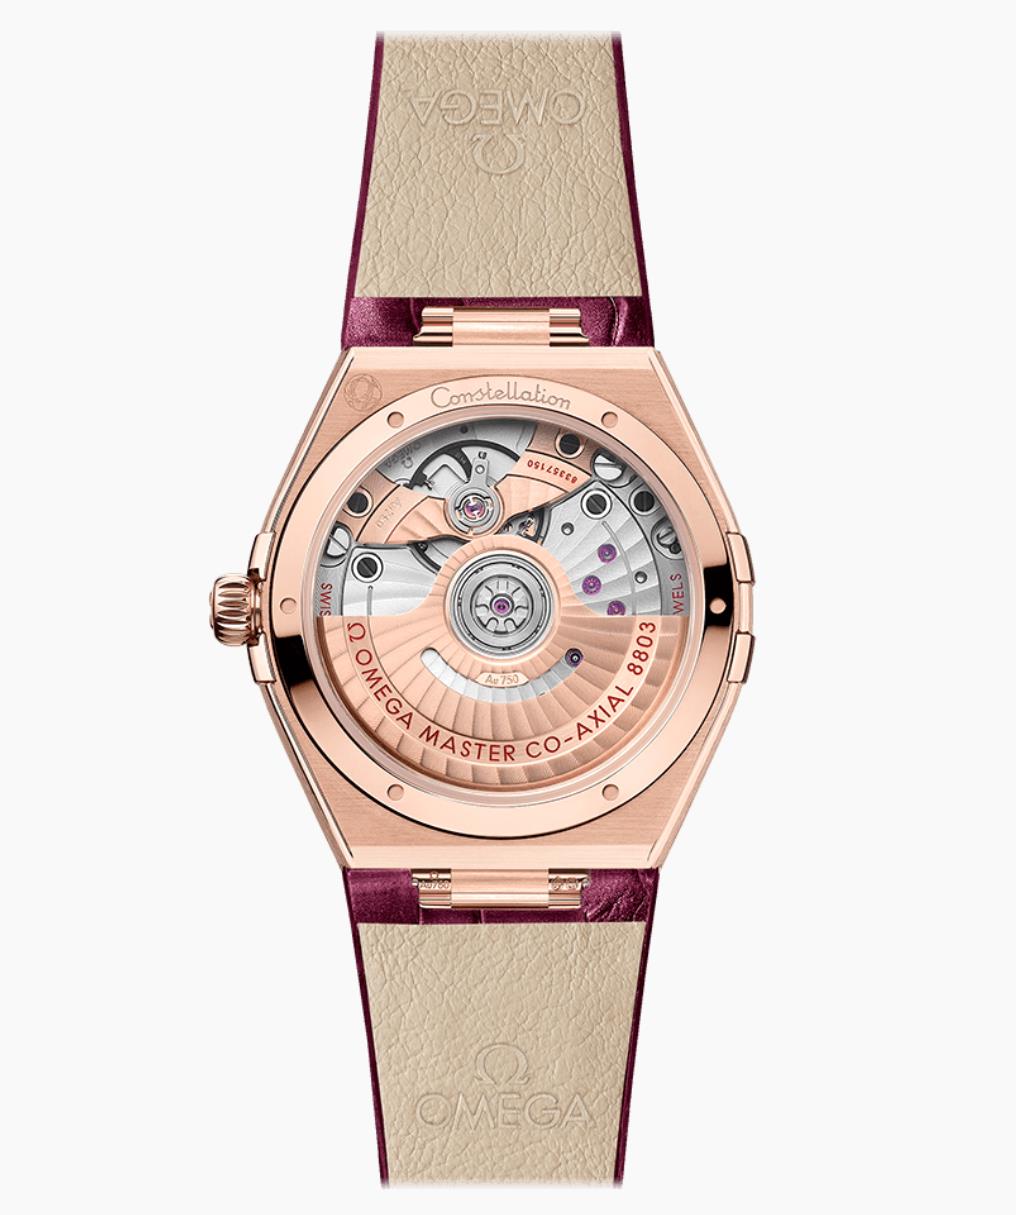 The Swiss made fake watch is equipped with caliber 8803.